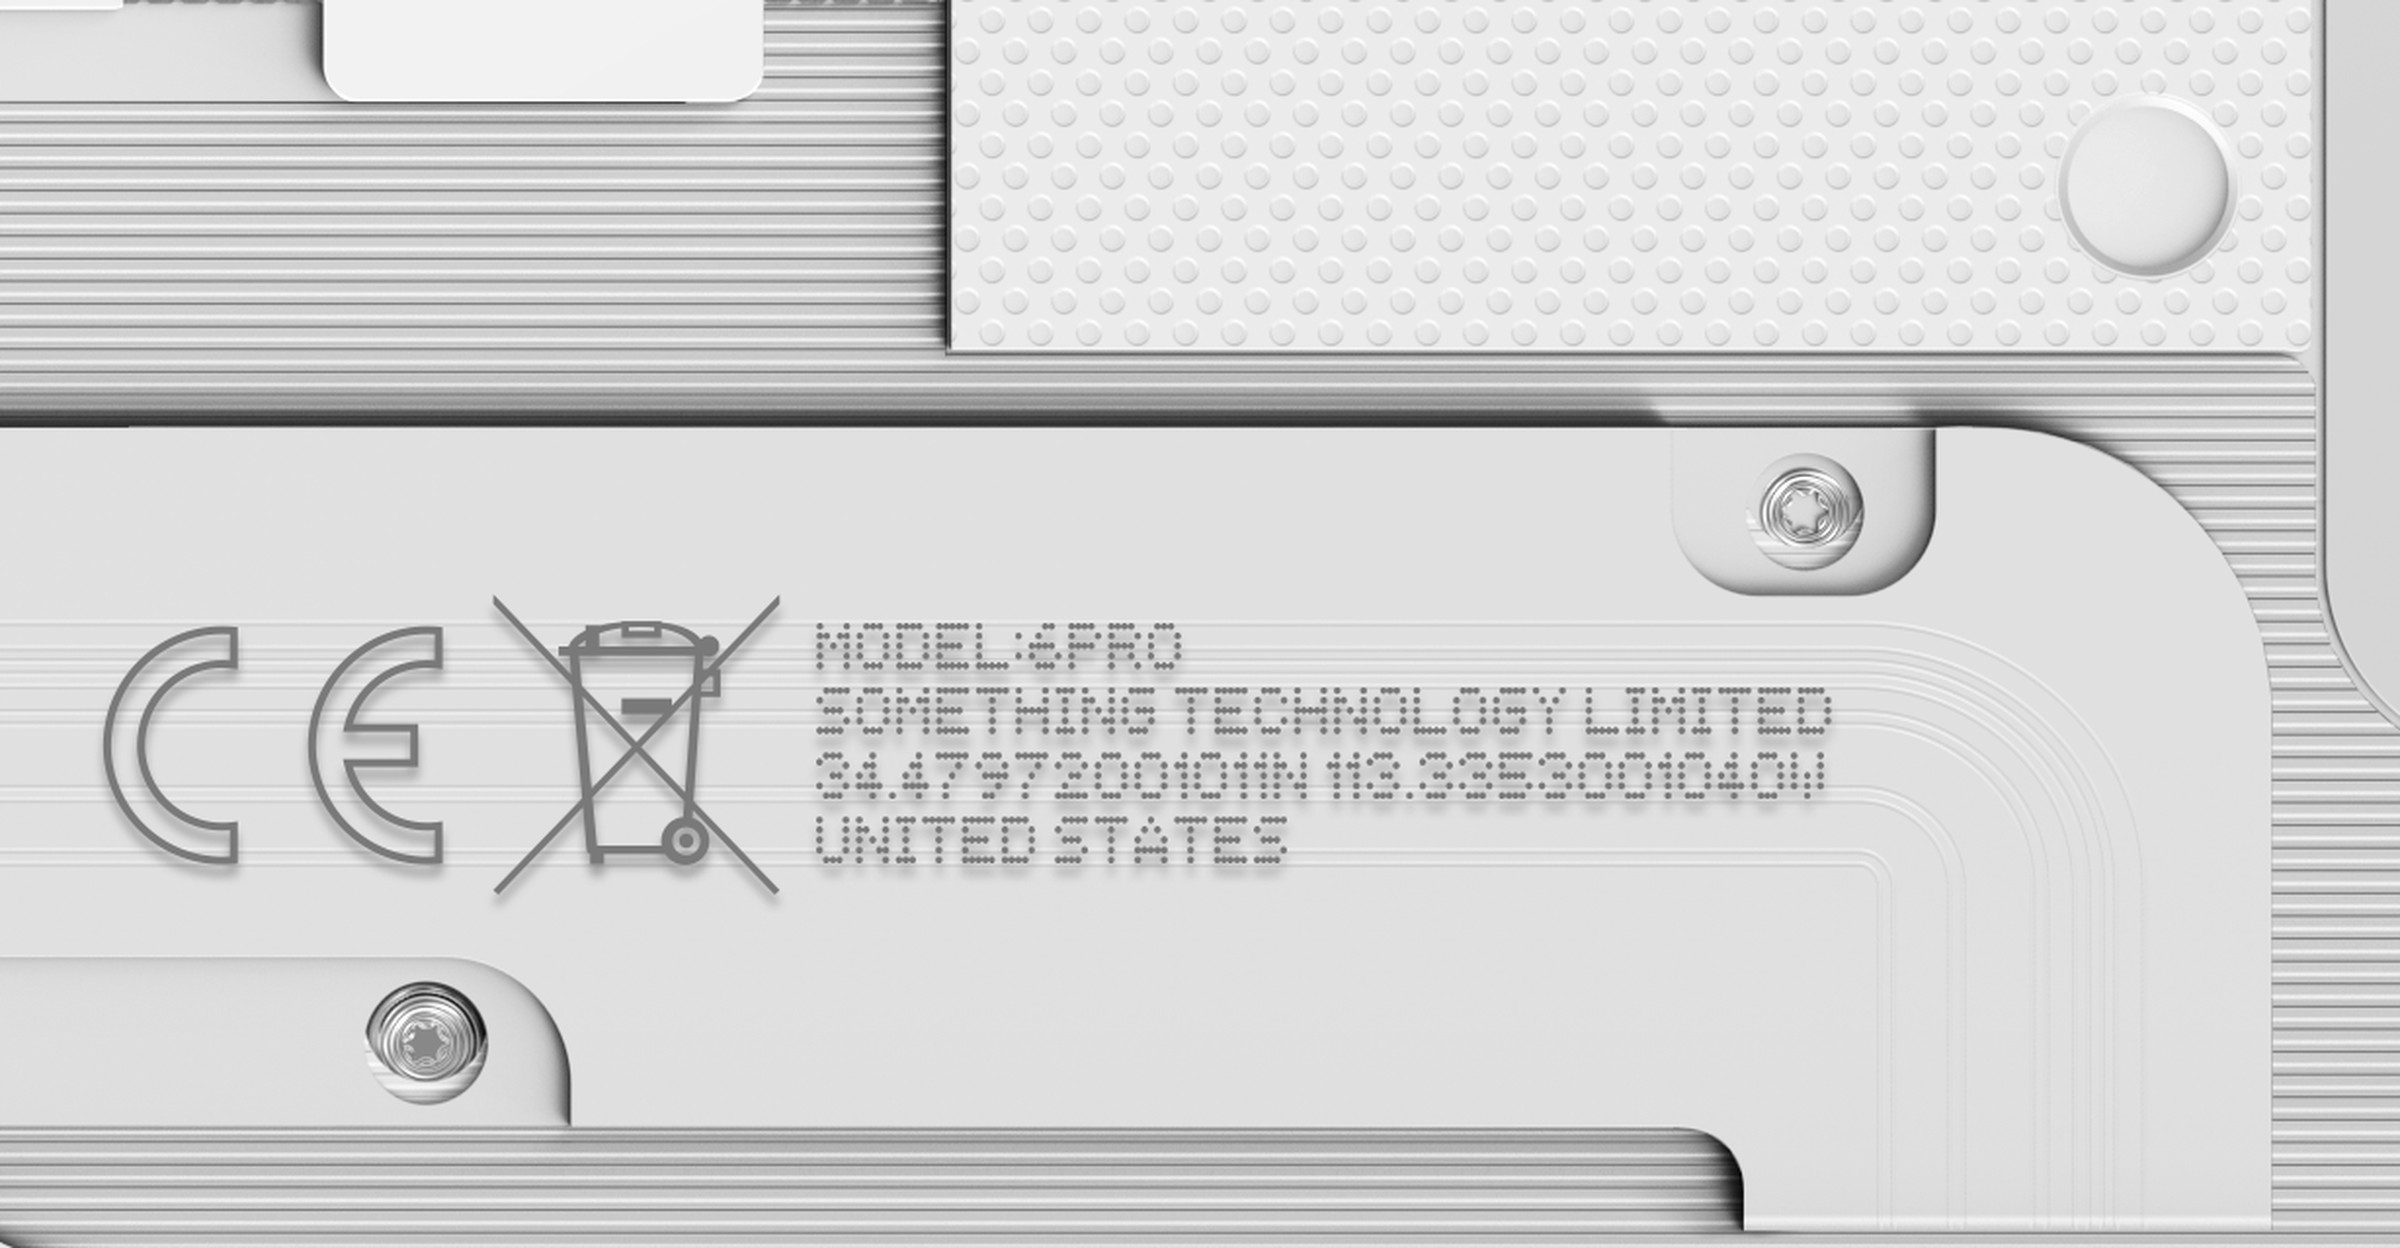 There’s text printed on the small corner of this zoomed in image of the decal. It reads Model:6PRO, Something Technology Limited, 34.47972001011N 113.3353001040W, United States. There’s a no not trash icon and a CE icon on what looks like a whited out ribbon cable.